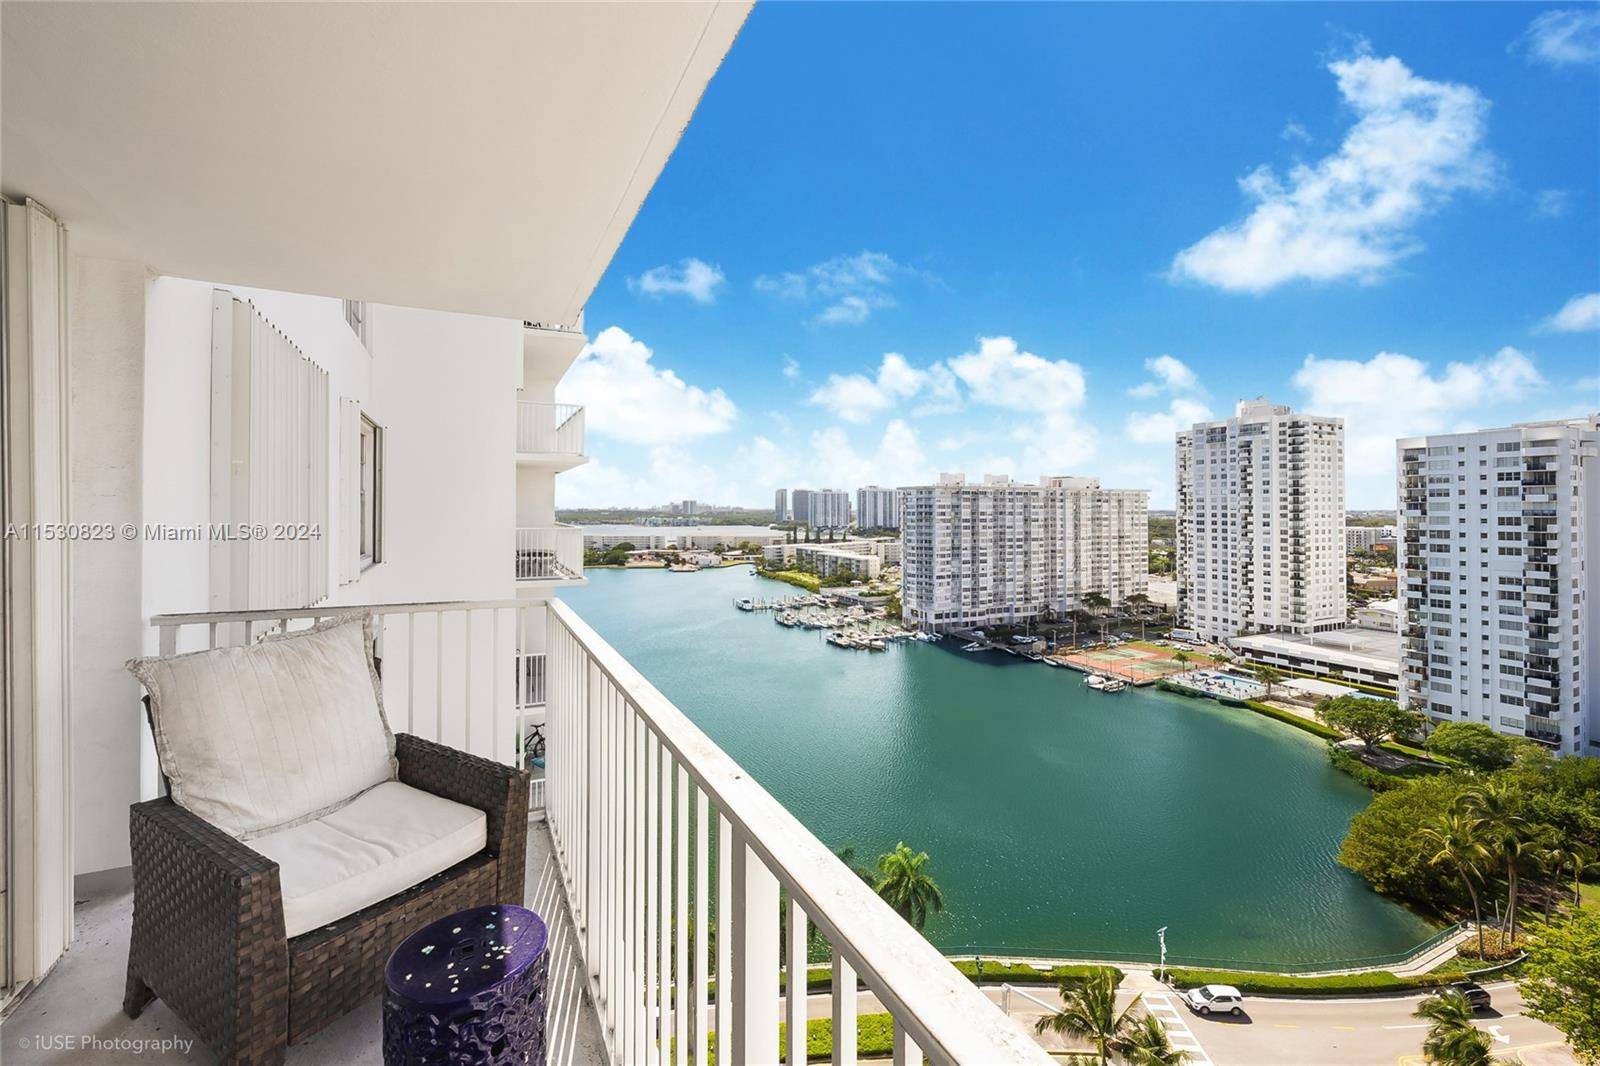 Experience the pinnacle of luxury living in this newly renovated condo nestled in the heart of Aventura.